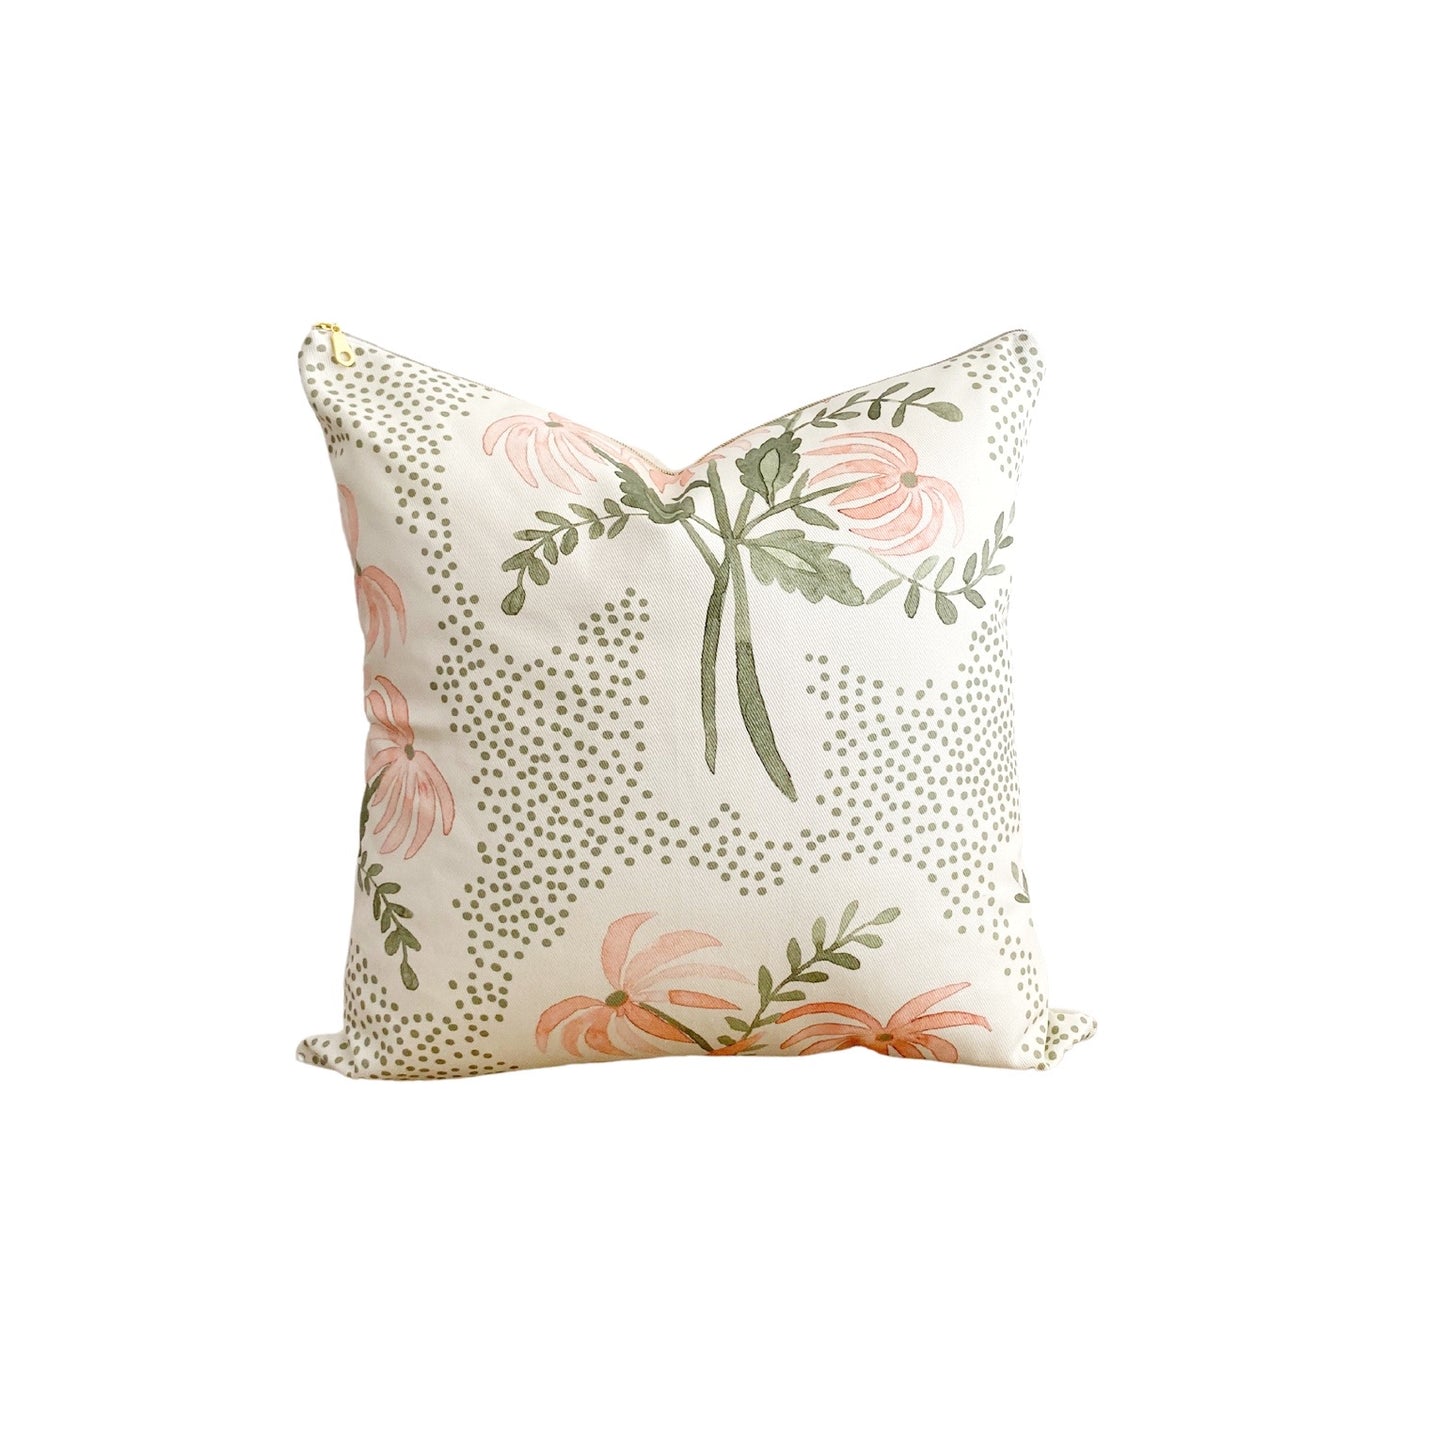 Pearl's Bouquet Pink and Green Pillow Cover - Designed by Danika Herrick